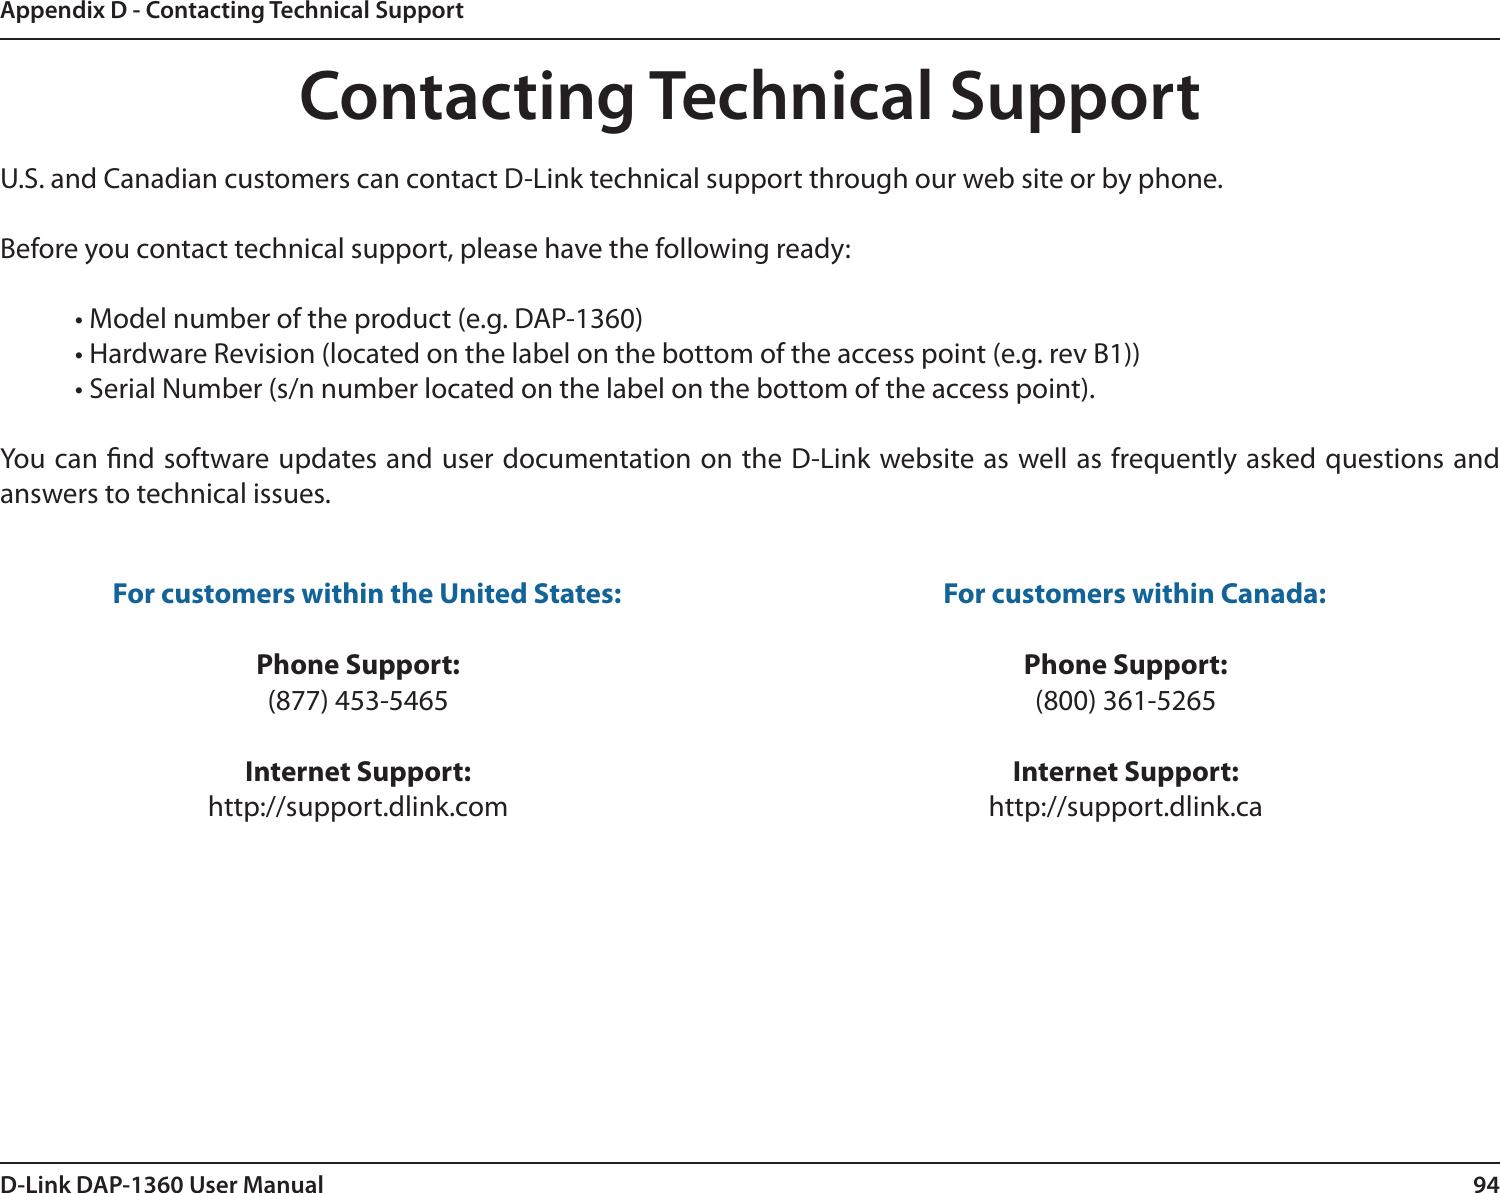 94D-Link DAP-1360 User ManualAppendix D - Contacting Technical SupportContacting Technical SupportU.S. and Canadian customers can contact D-Link technical support through our web site or by phone.Before you contact technical support, please have the following ready:  • Model number of the product (e.g. DAP-1360)  • Hardware Revision (located on the label on the bottom of the access point (e.g. rev B1))  • Serial Number (s/n number located on the label on the bottom of the access point). You can nd software updates and user documentation on the D-Link website as well as frequently asked questions and answers to technical issues.For customers within the United States: Phone Support:(877) 453-5465Internet Support:http://support.dlink.com For customers within Canada: Phone Support:(800) 361-5265 Internet Support:http://support.dlink.ca